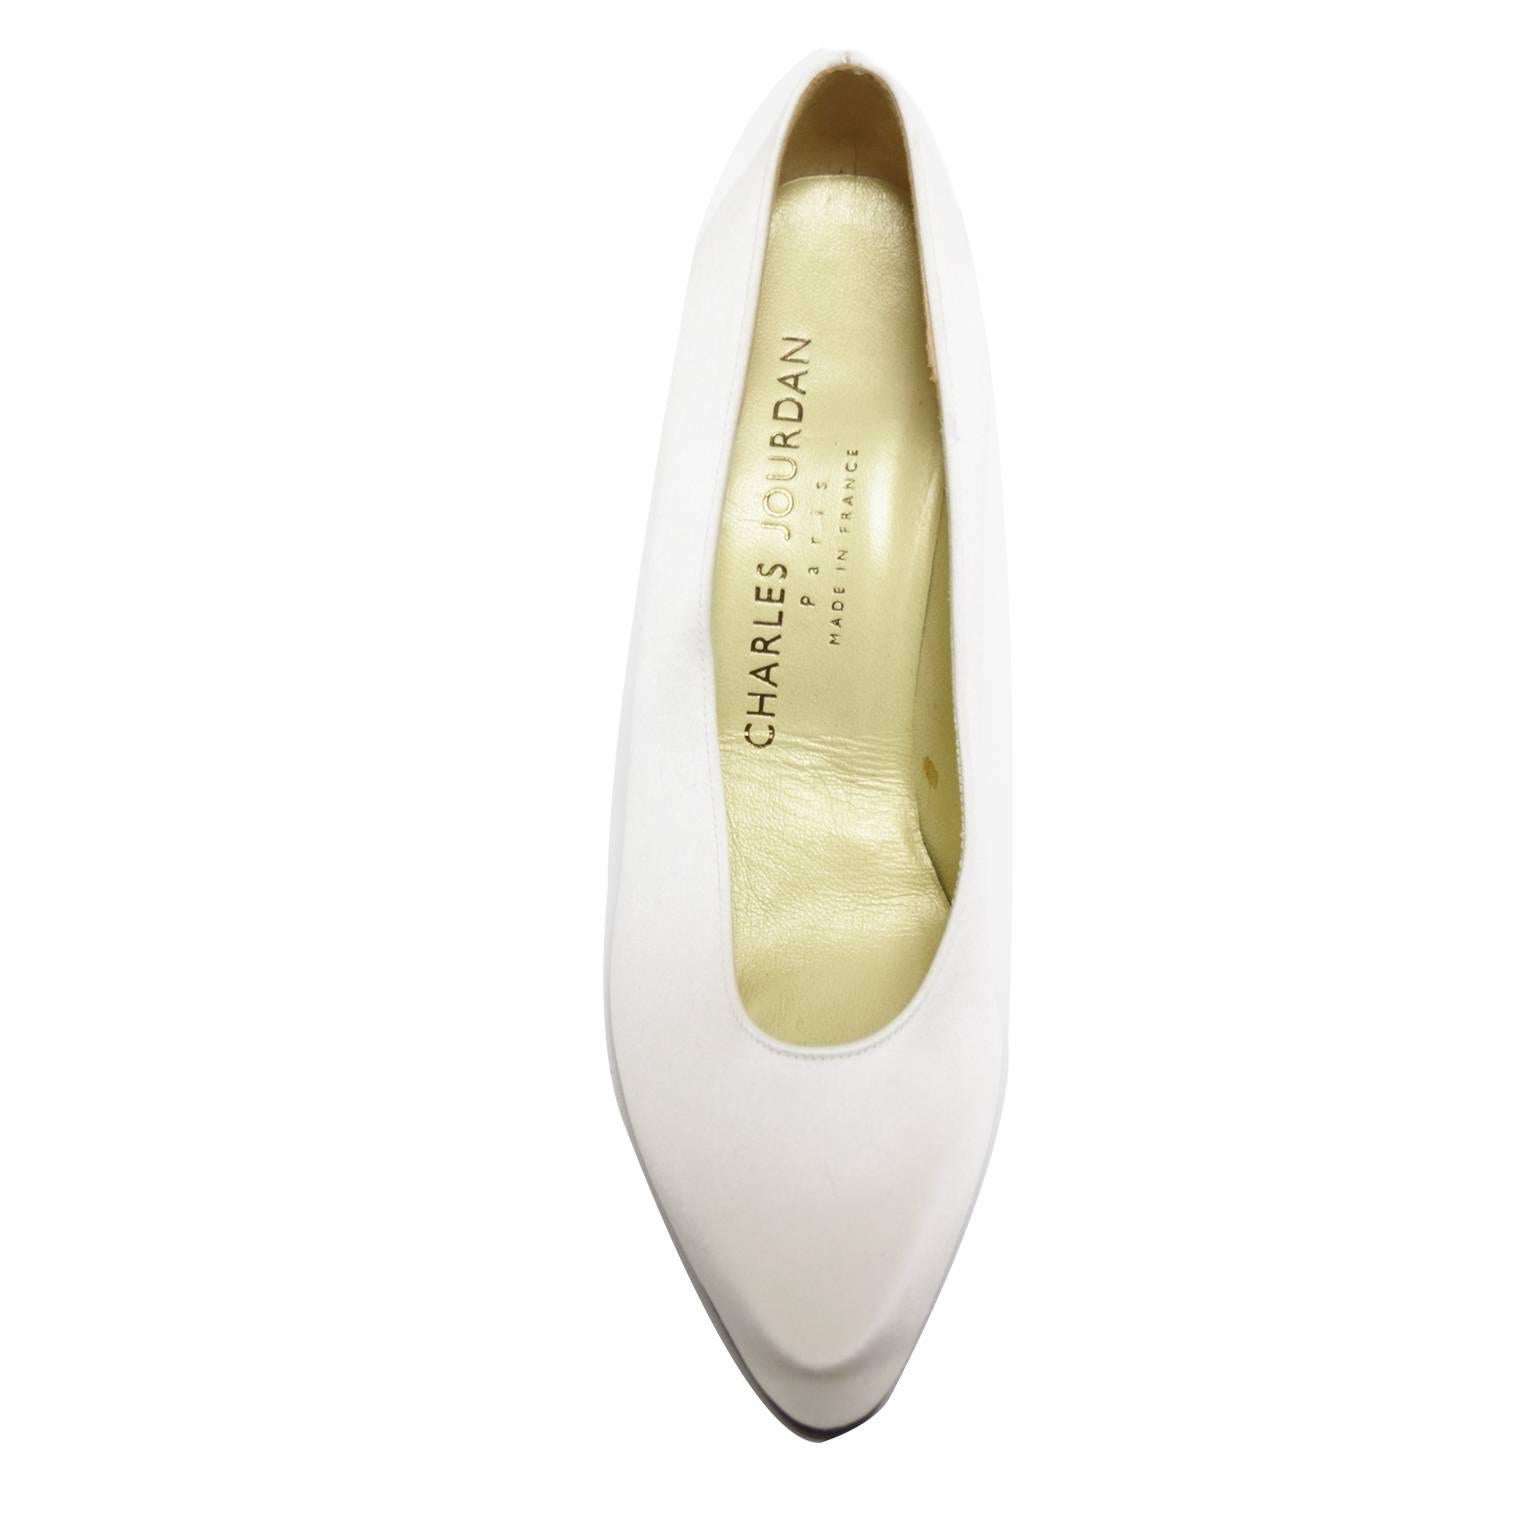 These Charles Jourdan pumps are engulfed in rich ivory satin that covers the upper, sole, heel. The heel is a spanish heel shape and the sole is brand new black and wooden.  